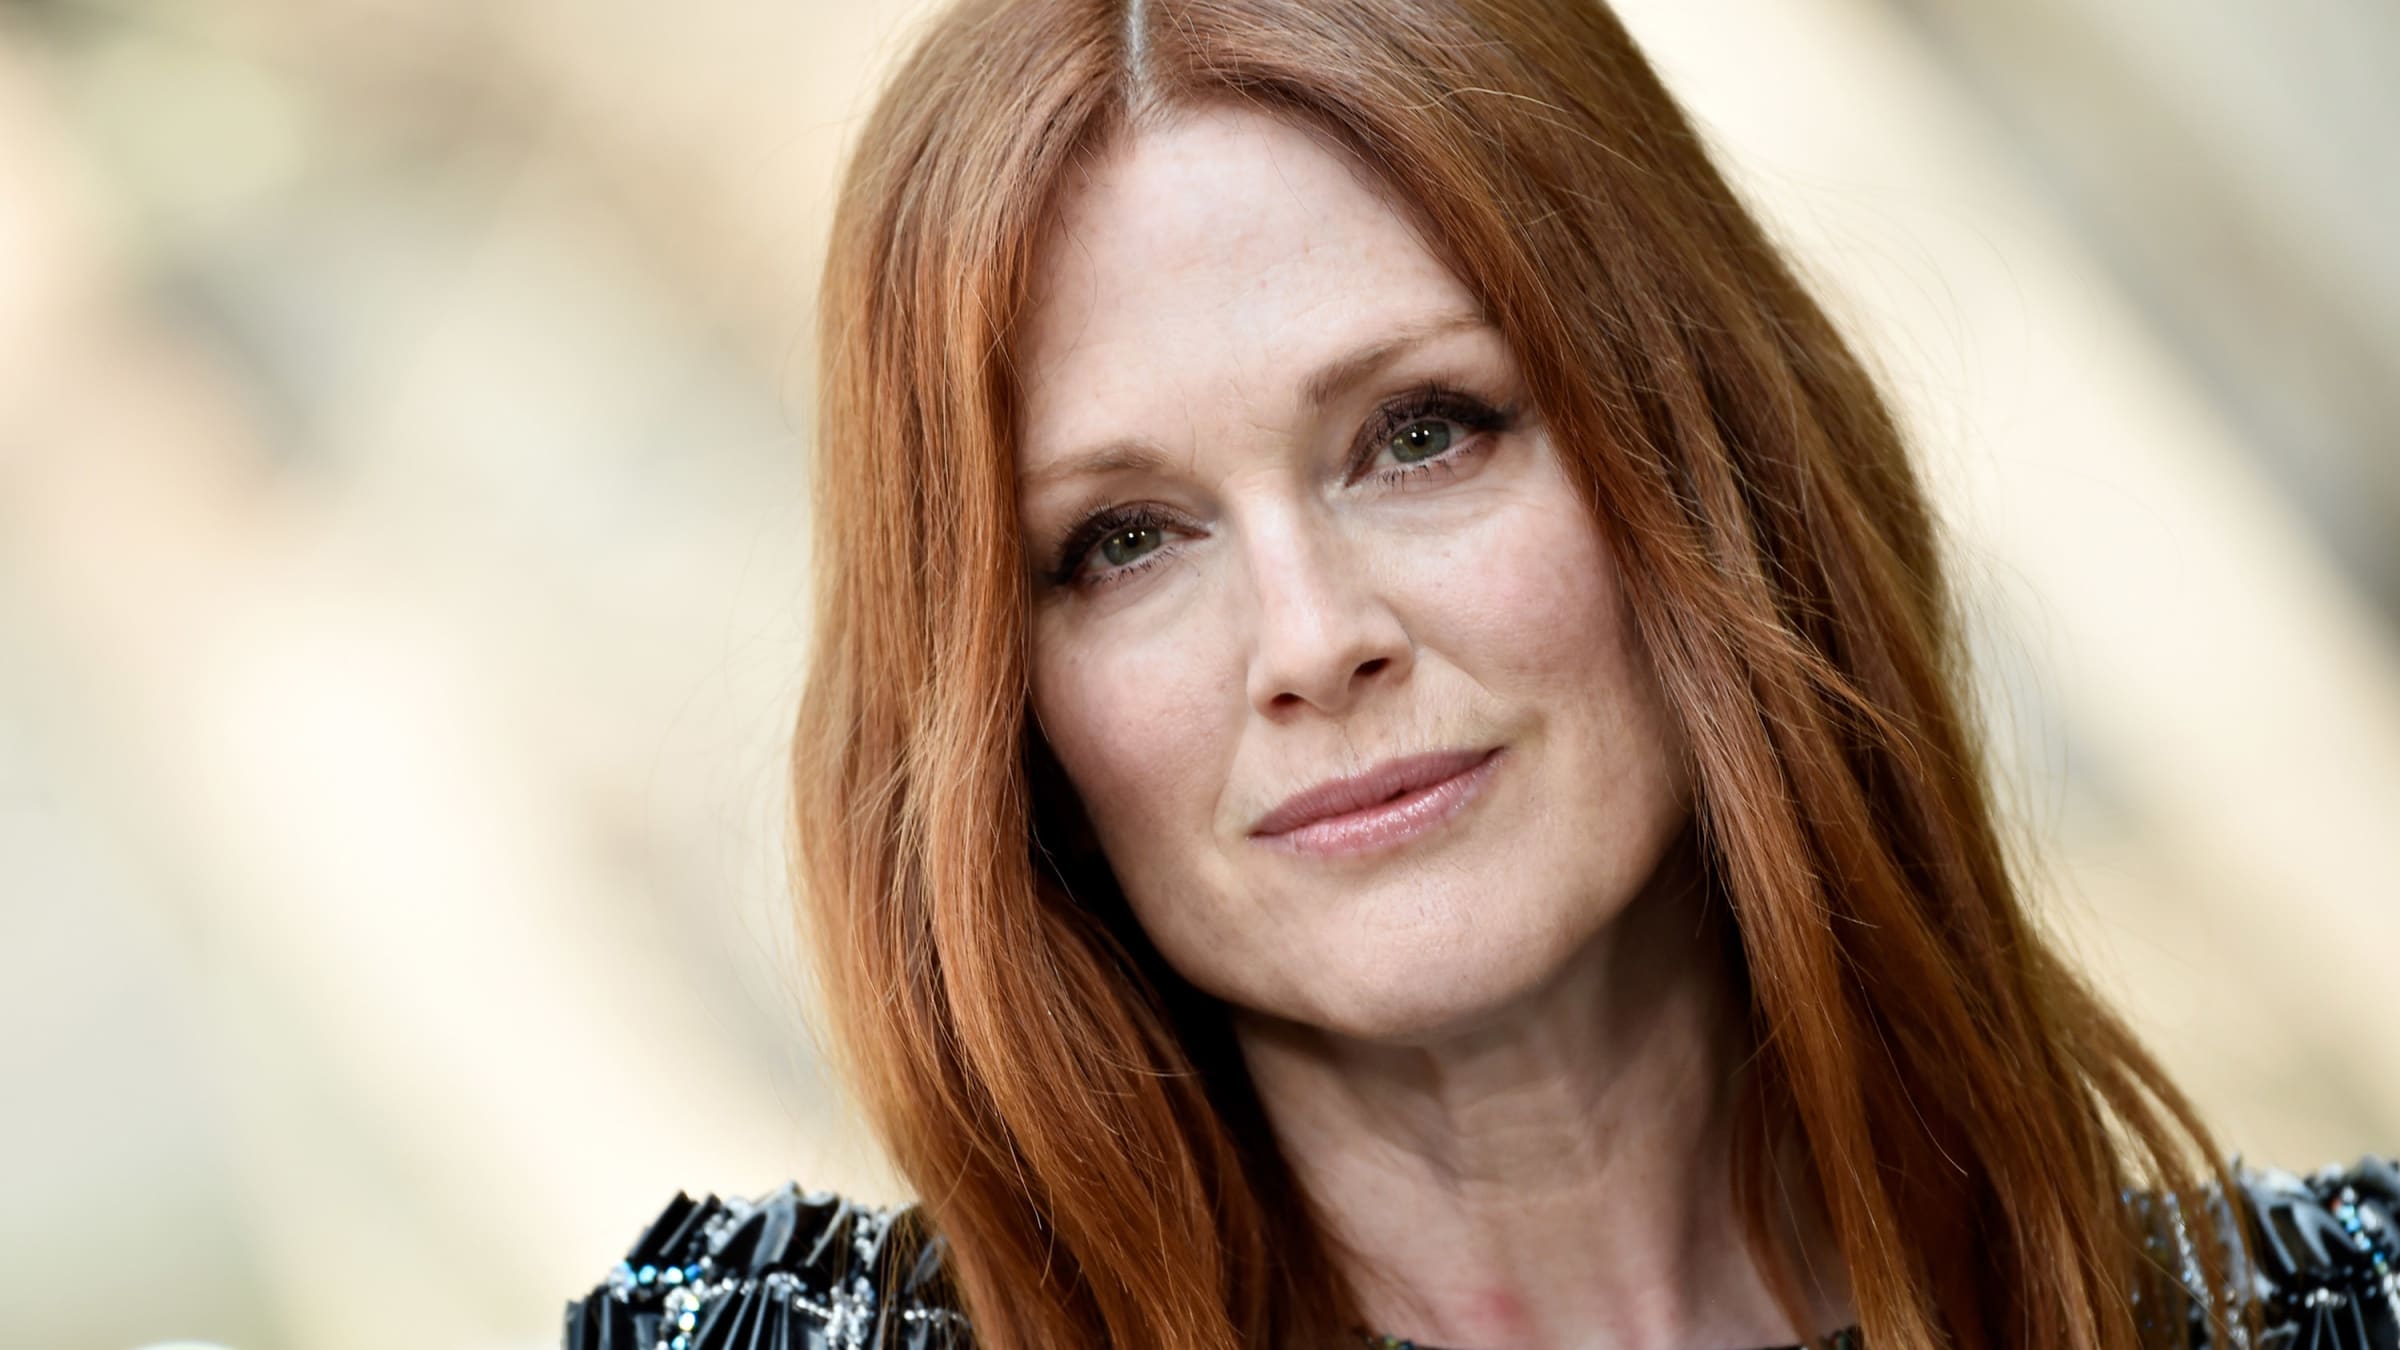 Julianne Moore’s Warning to Trump on Guns: ‘This Is a National Emergency’